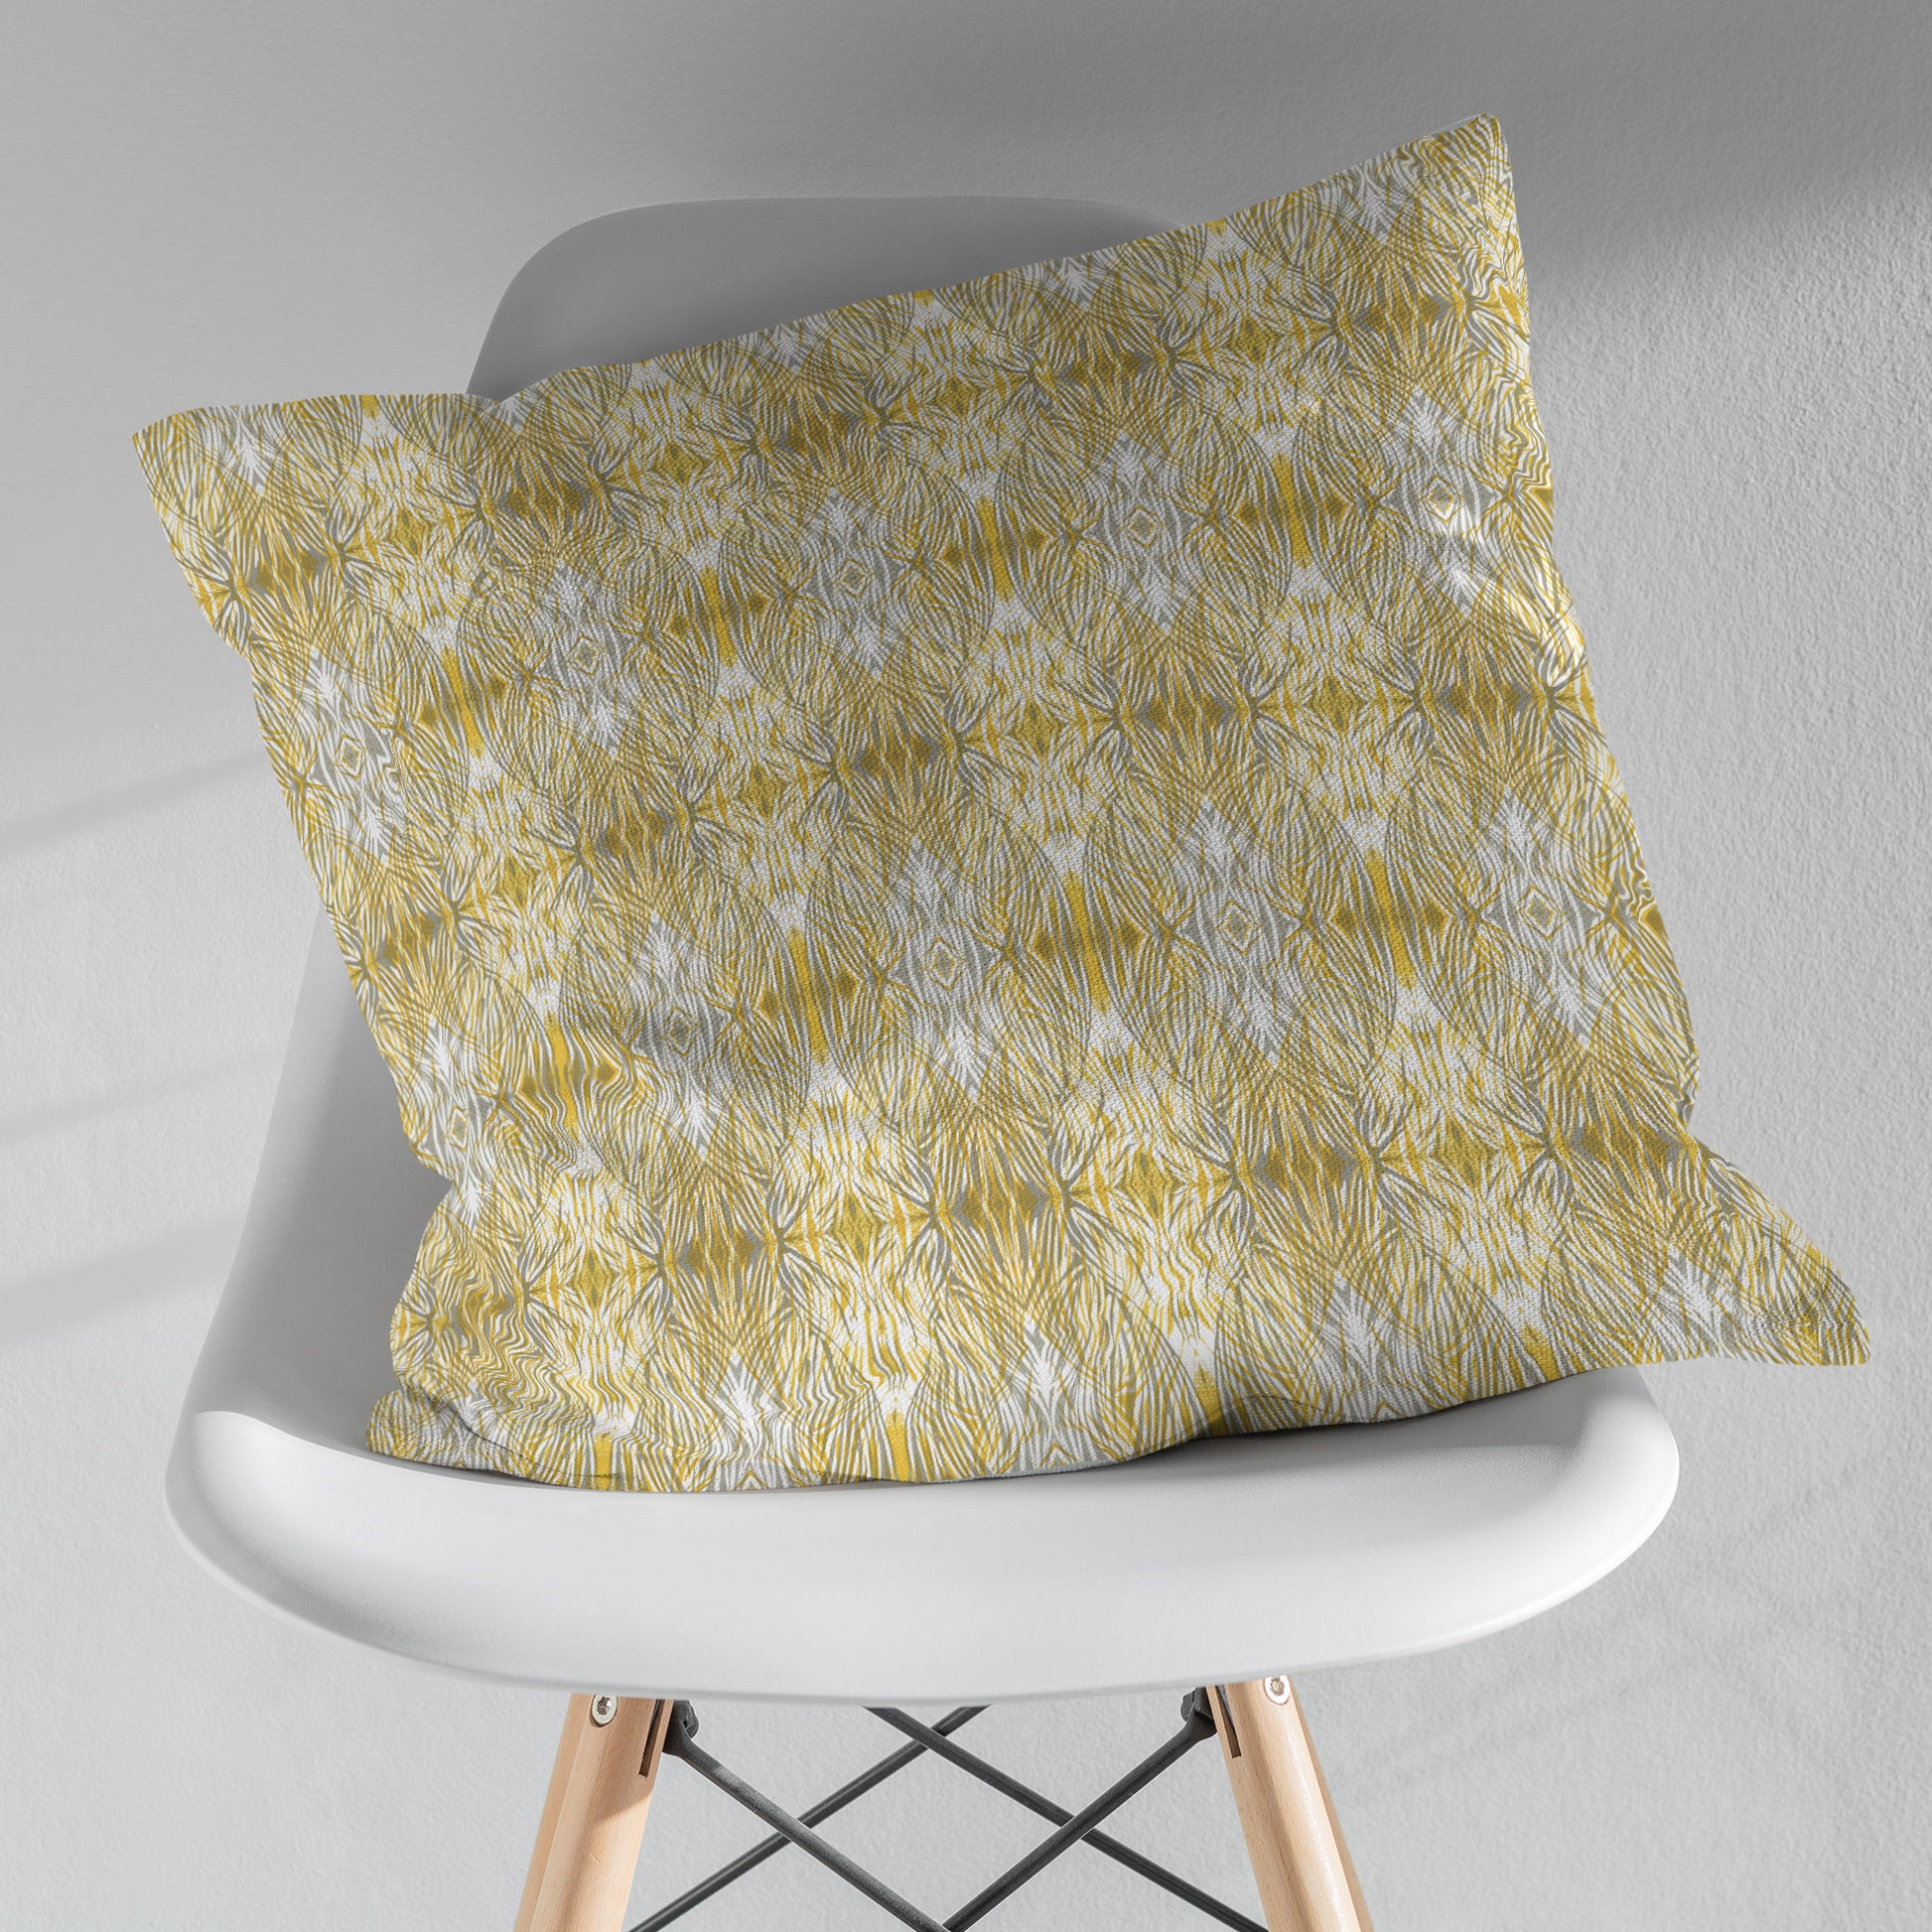 Gold and gray patterned pillow sitting on a white modernist chair